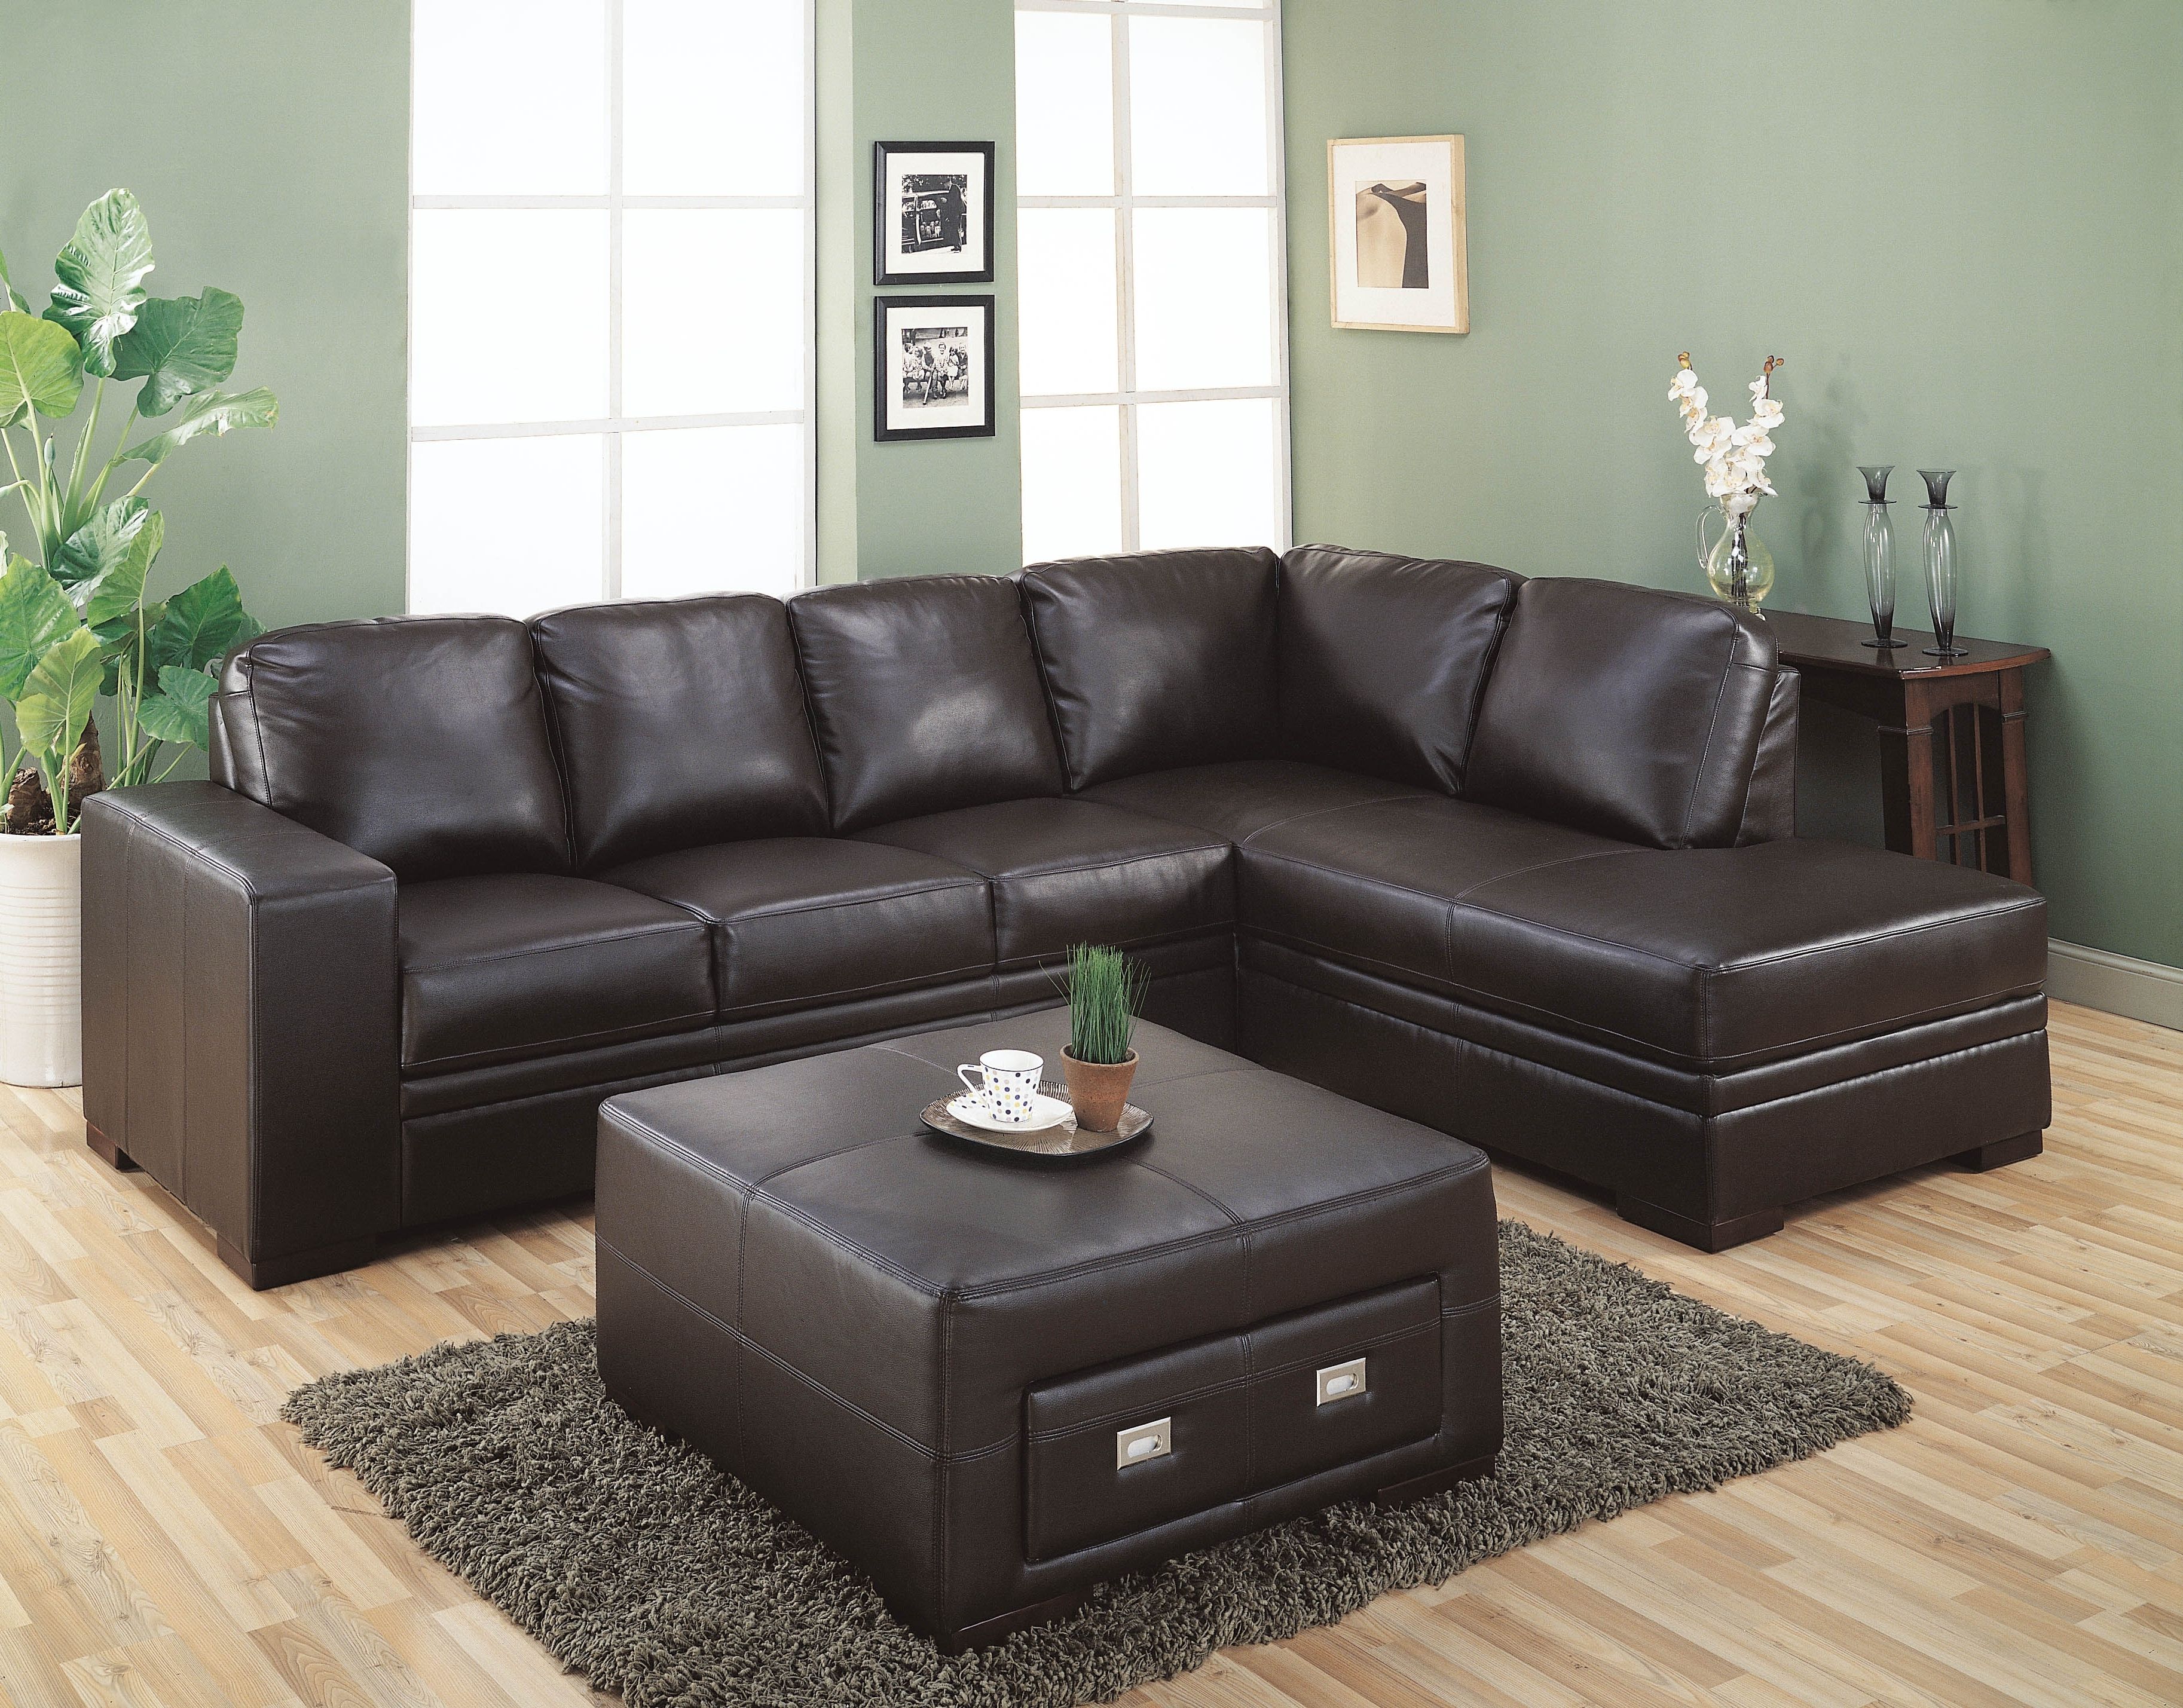 Well Known Memphis Tn Sectional Sofas Intended For Sofa Leather Sectional Sofas Collection Of Brown Black Couch For (View 1 of 20)